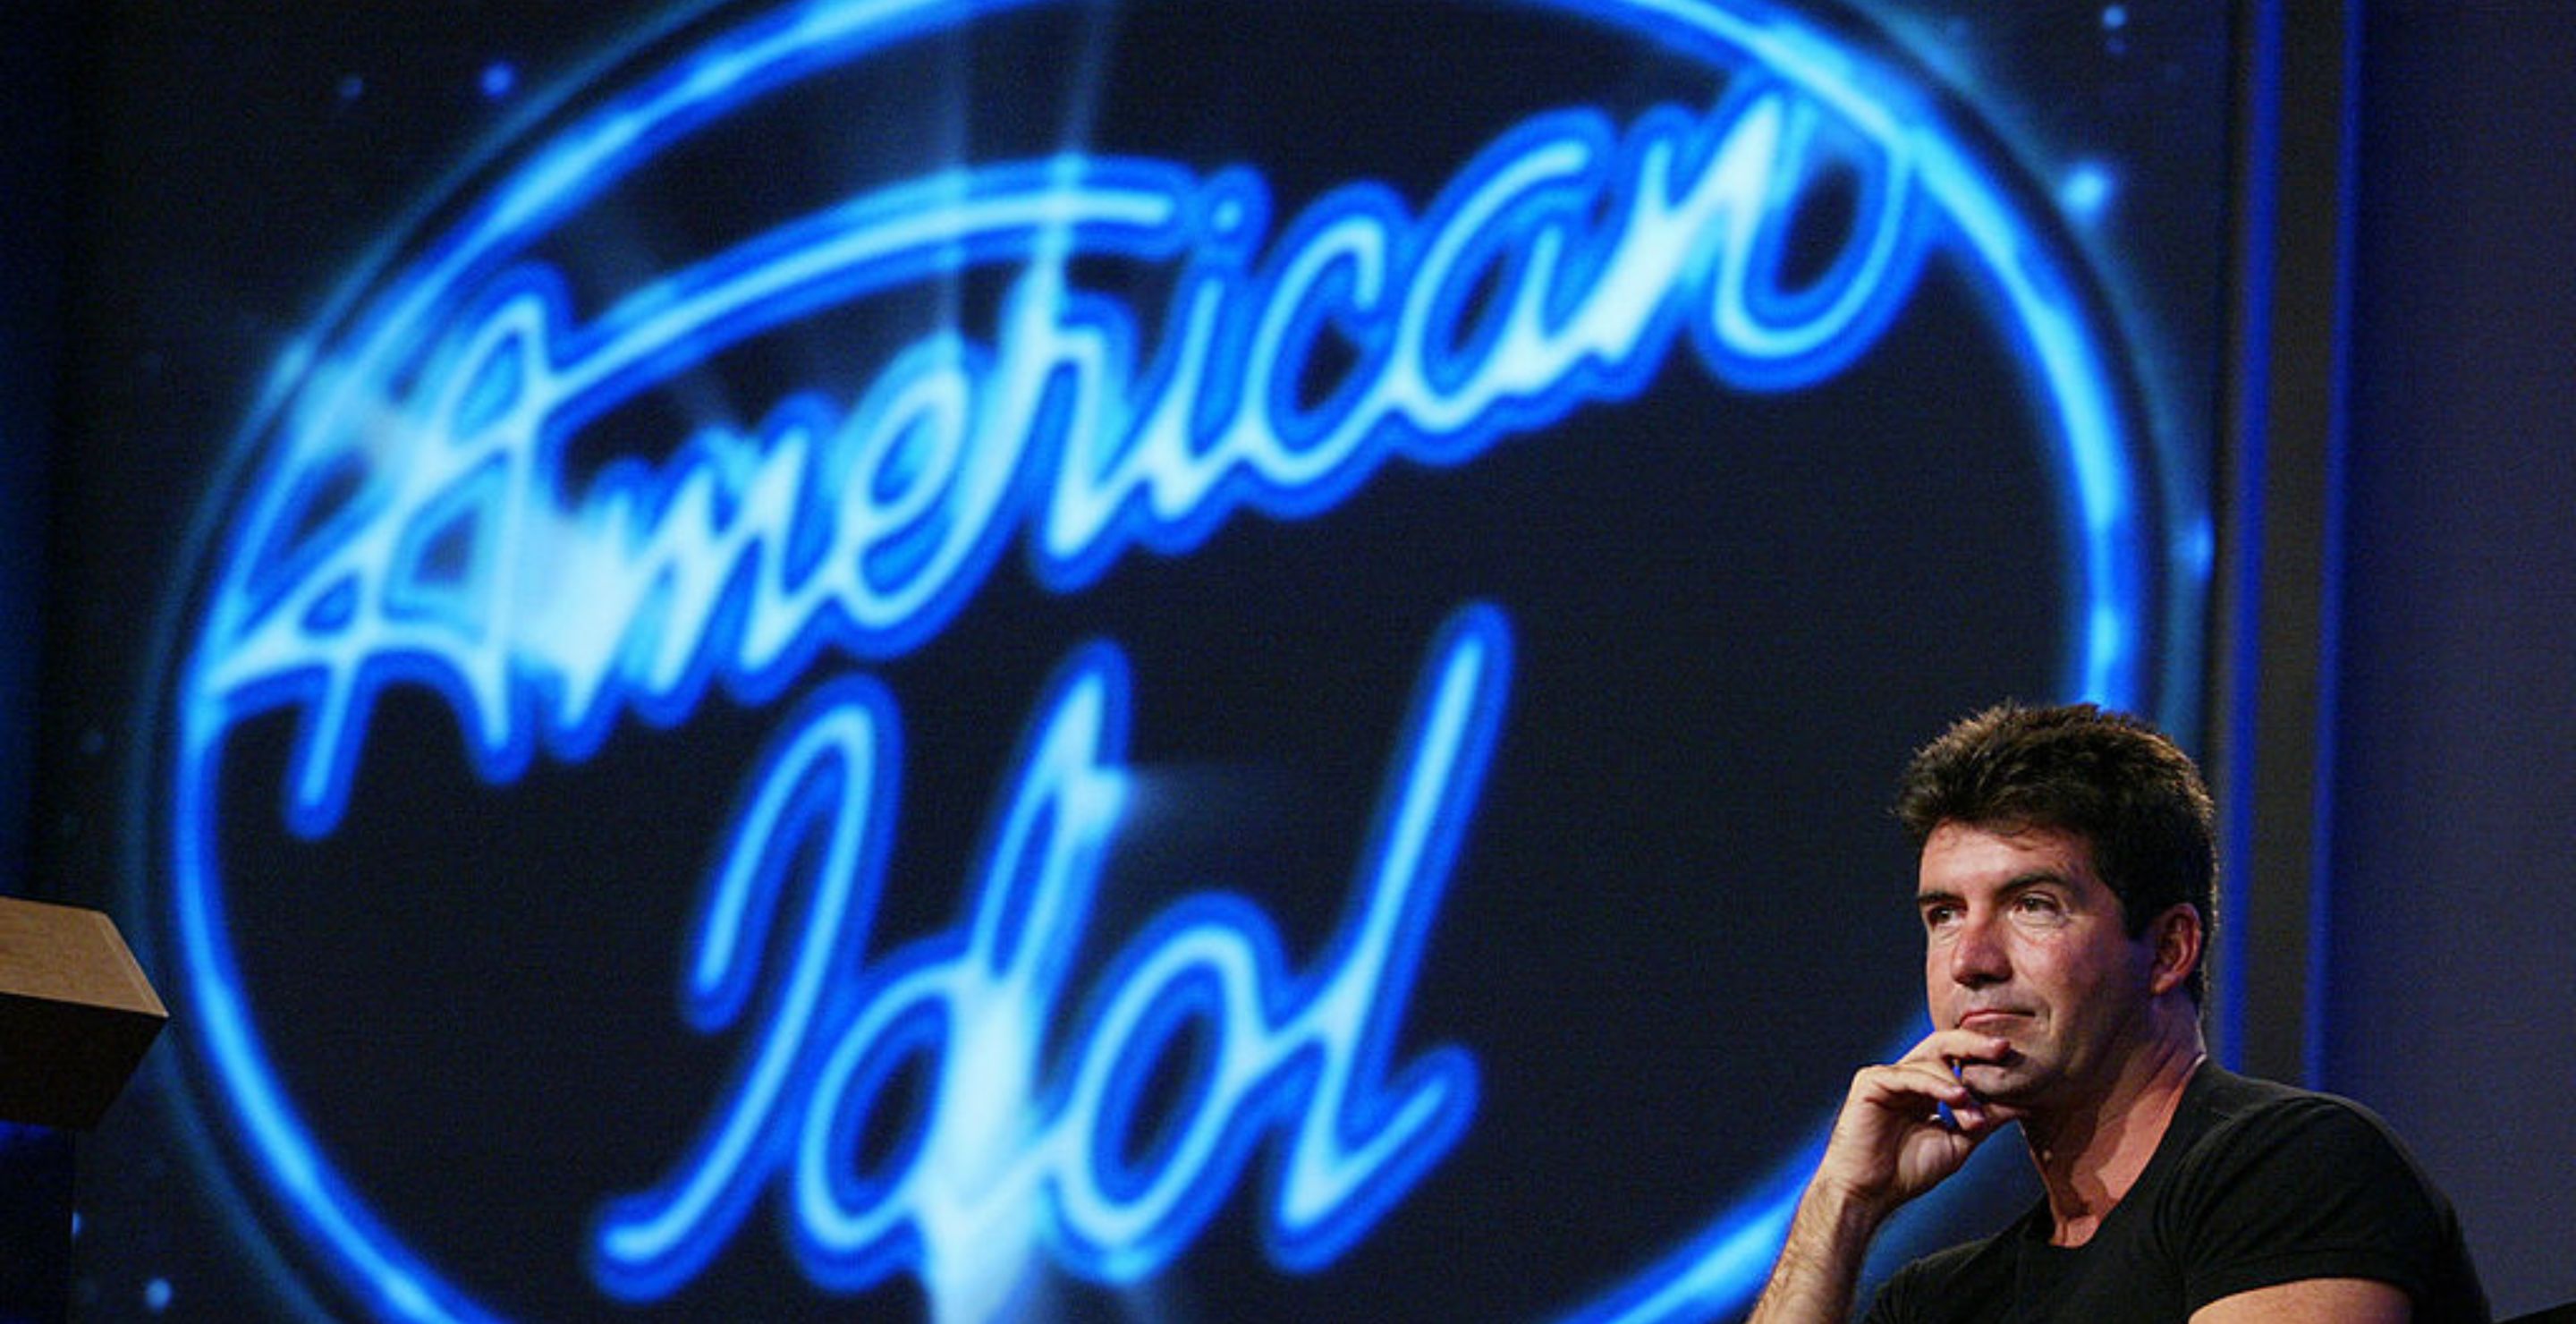 This 'American Idol' Finalist Just Got Engaged In The Sweetest Way